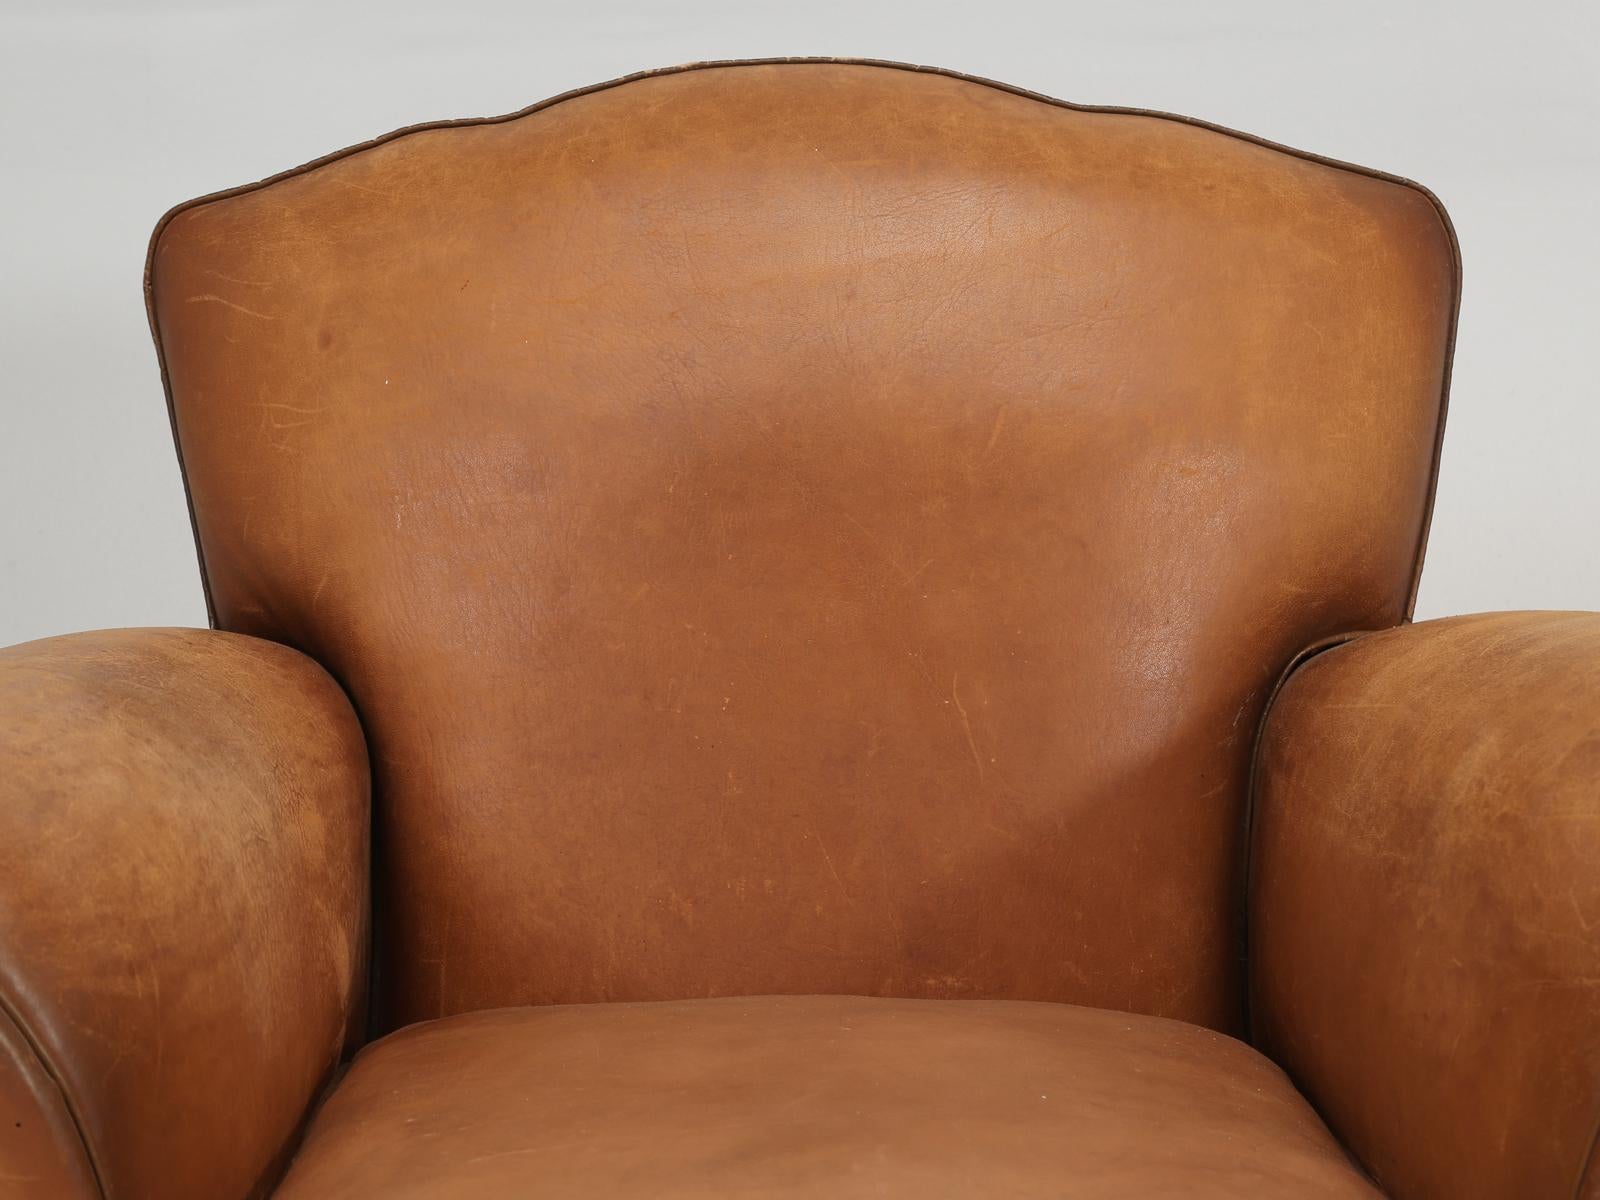 French Art Deco Club Chair from the 1930’s and in remarkable original condition. Inside the French leather club chair, we rebuilt the frame as needed and added horsehair for padding as per the original club chairs. What is quite unusual, is how